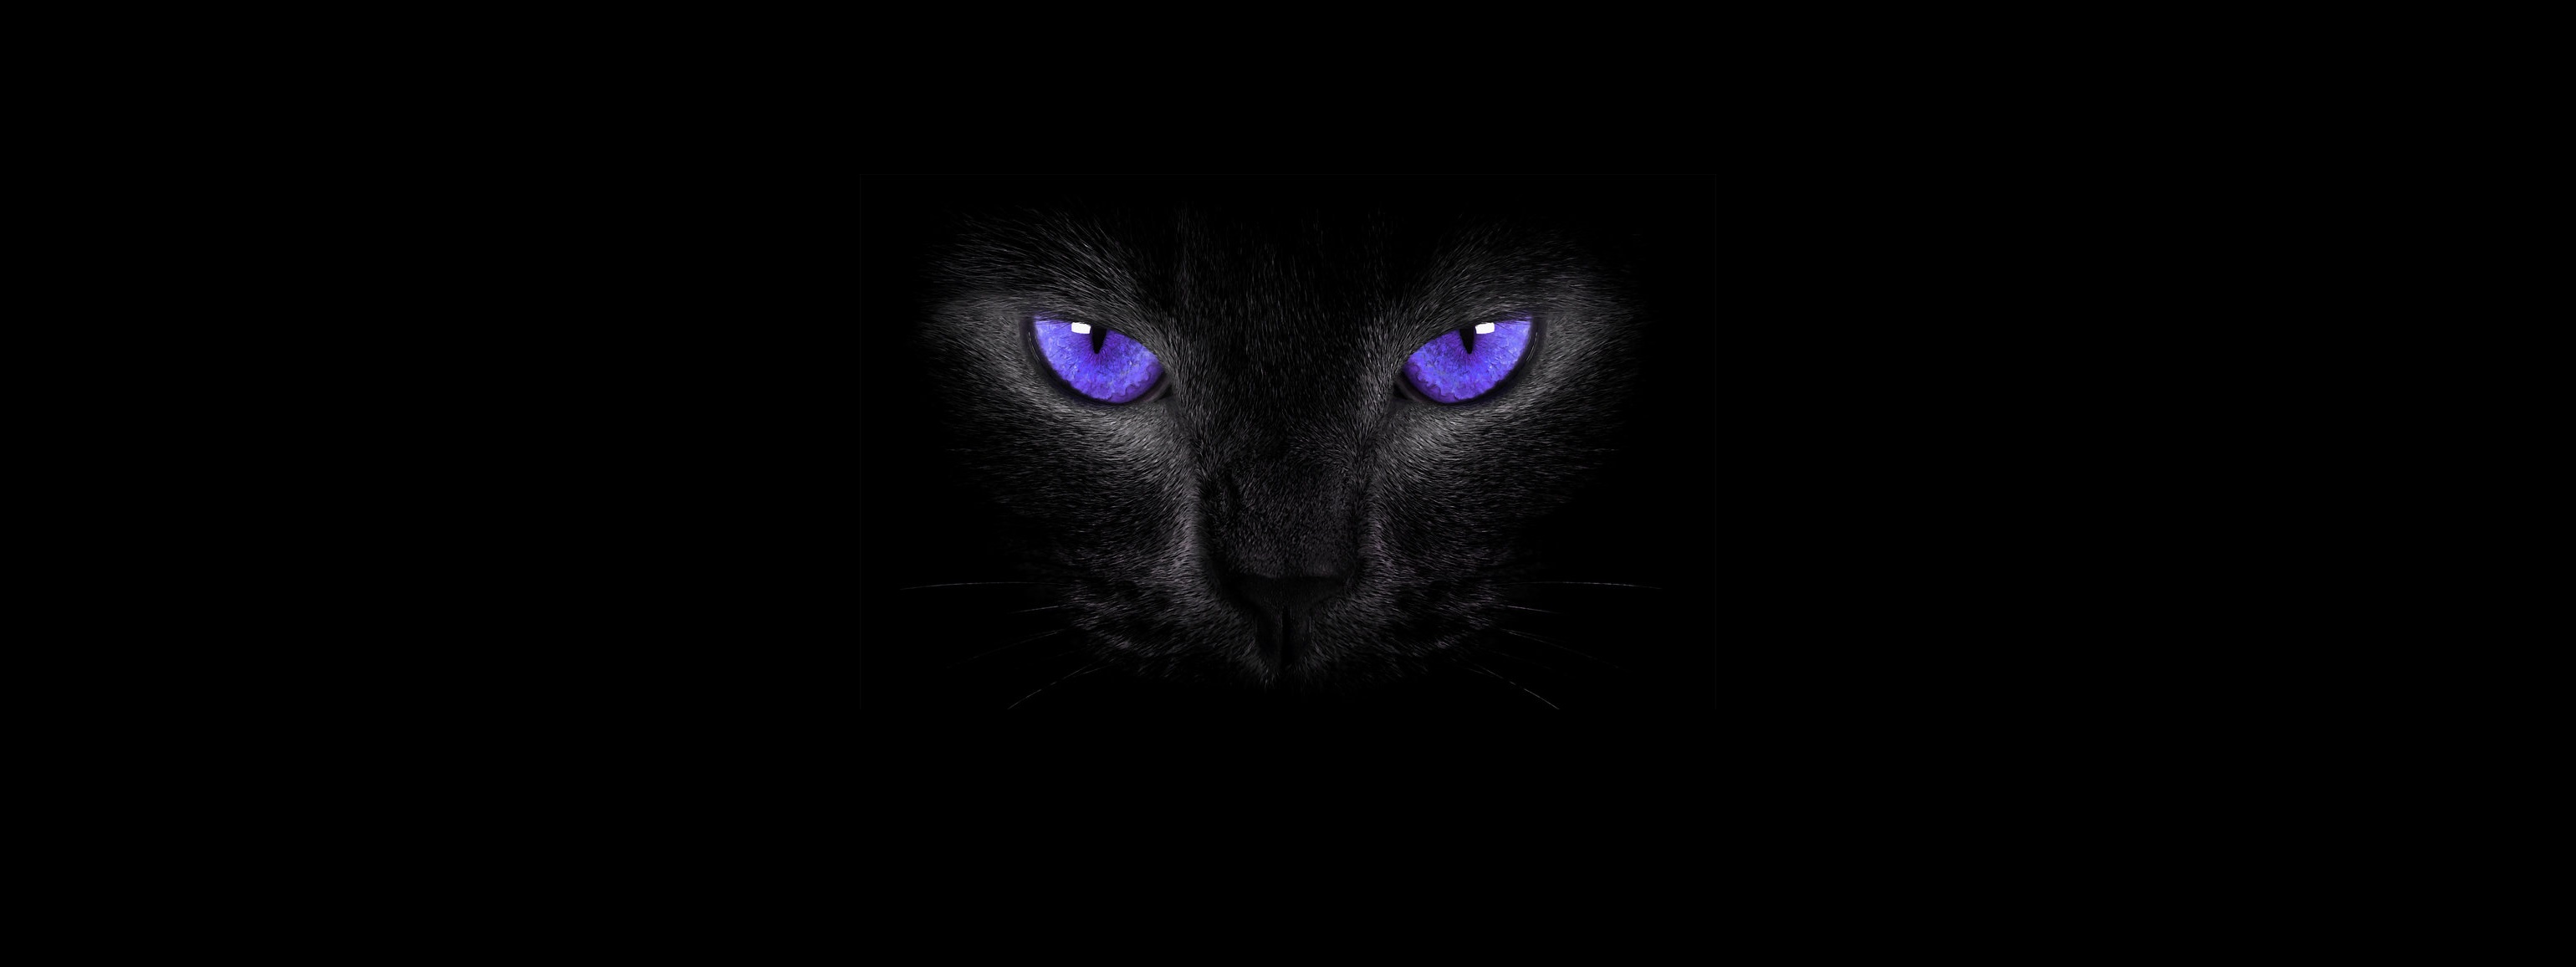 smoky eyes, Cat eyes, Simple background, Cat, Black cats Wallpaper